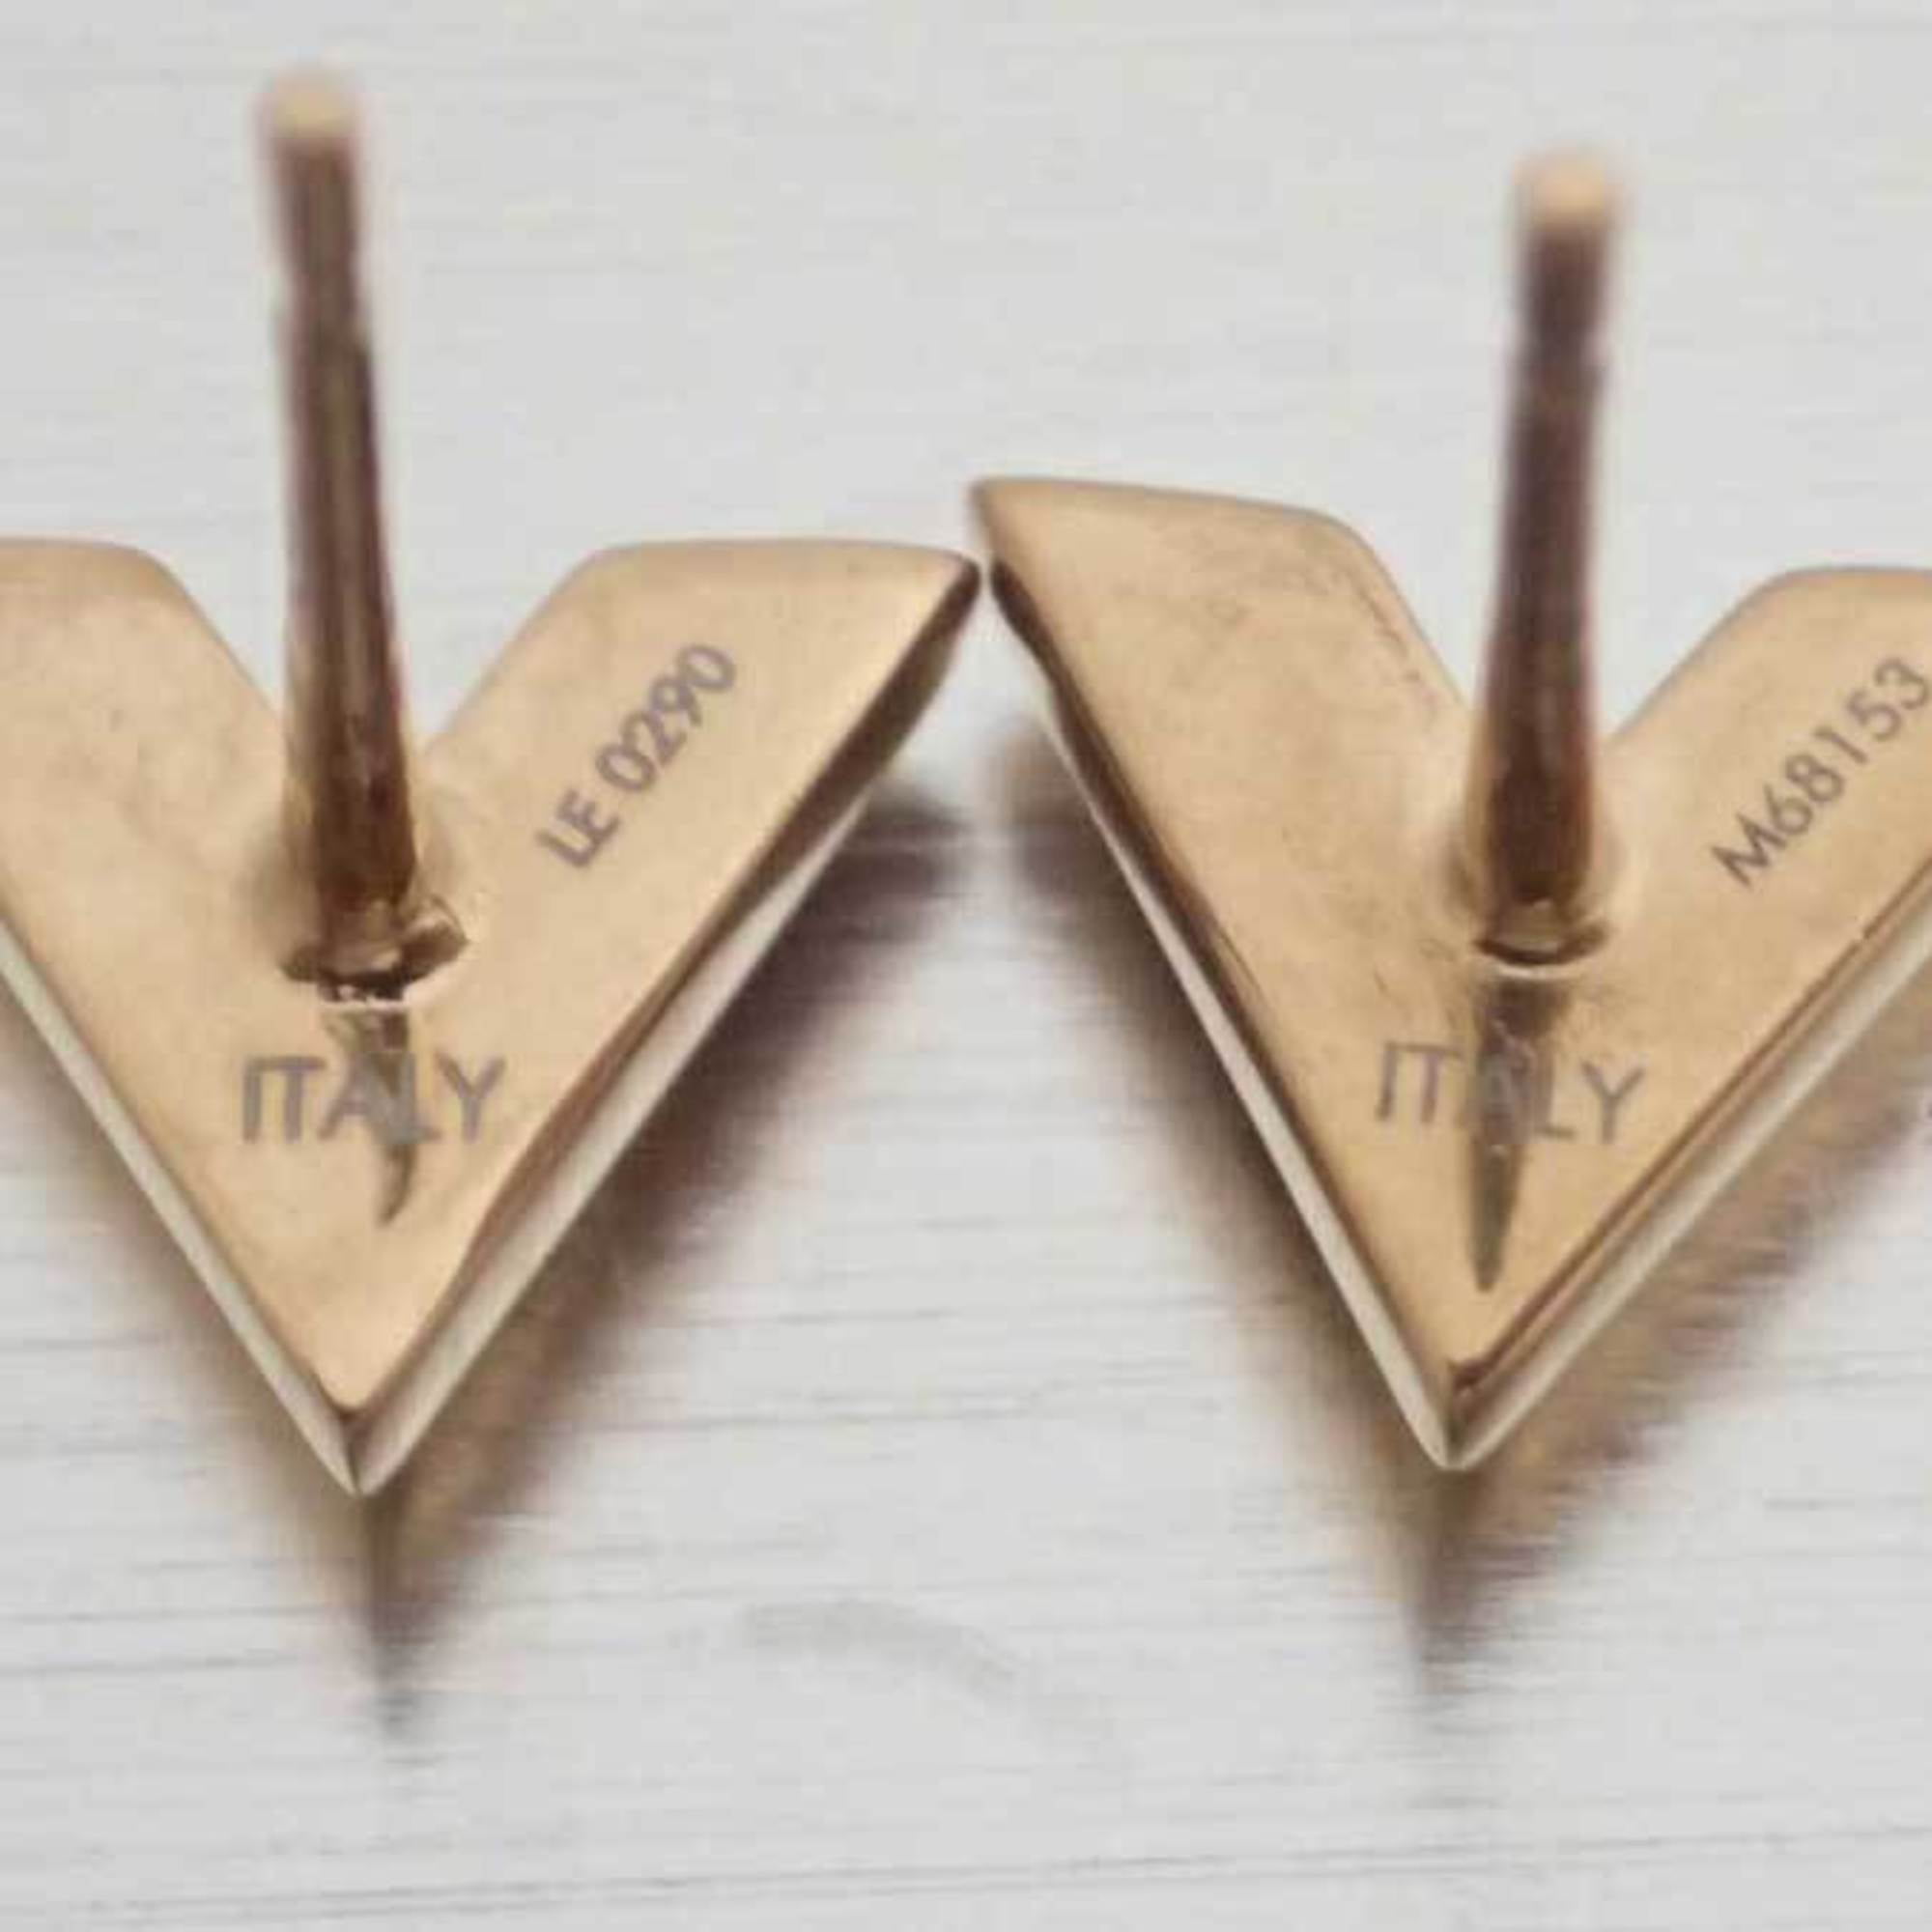 LOUIS VUITTON LOUIS VUITTON Stud Earrings Essential V Pierced earrings Gold  Plated Used women M63208｜Product Code：2100301065383｜BRAND OFF Online Store